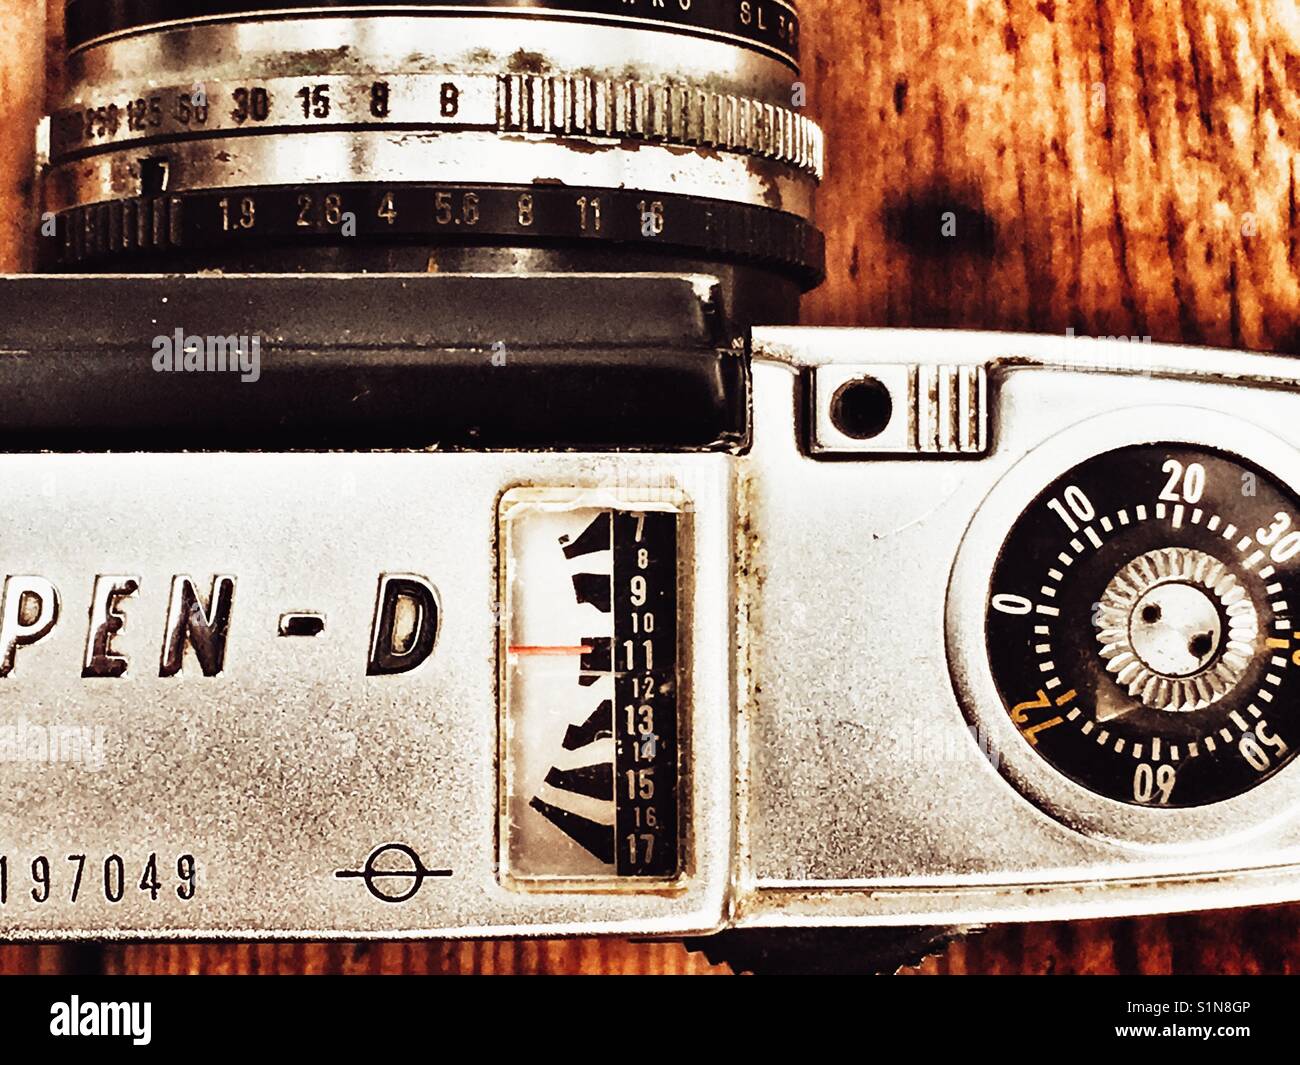 Olympus Pen D half frame camera with 72 frames per roll of film Stock Photo  - Alamy